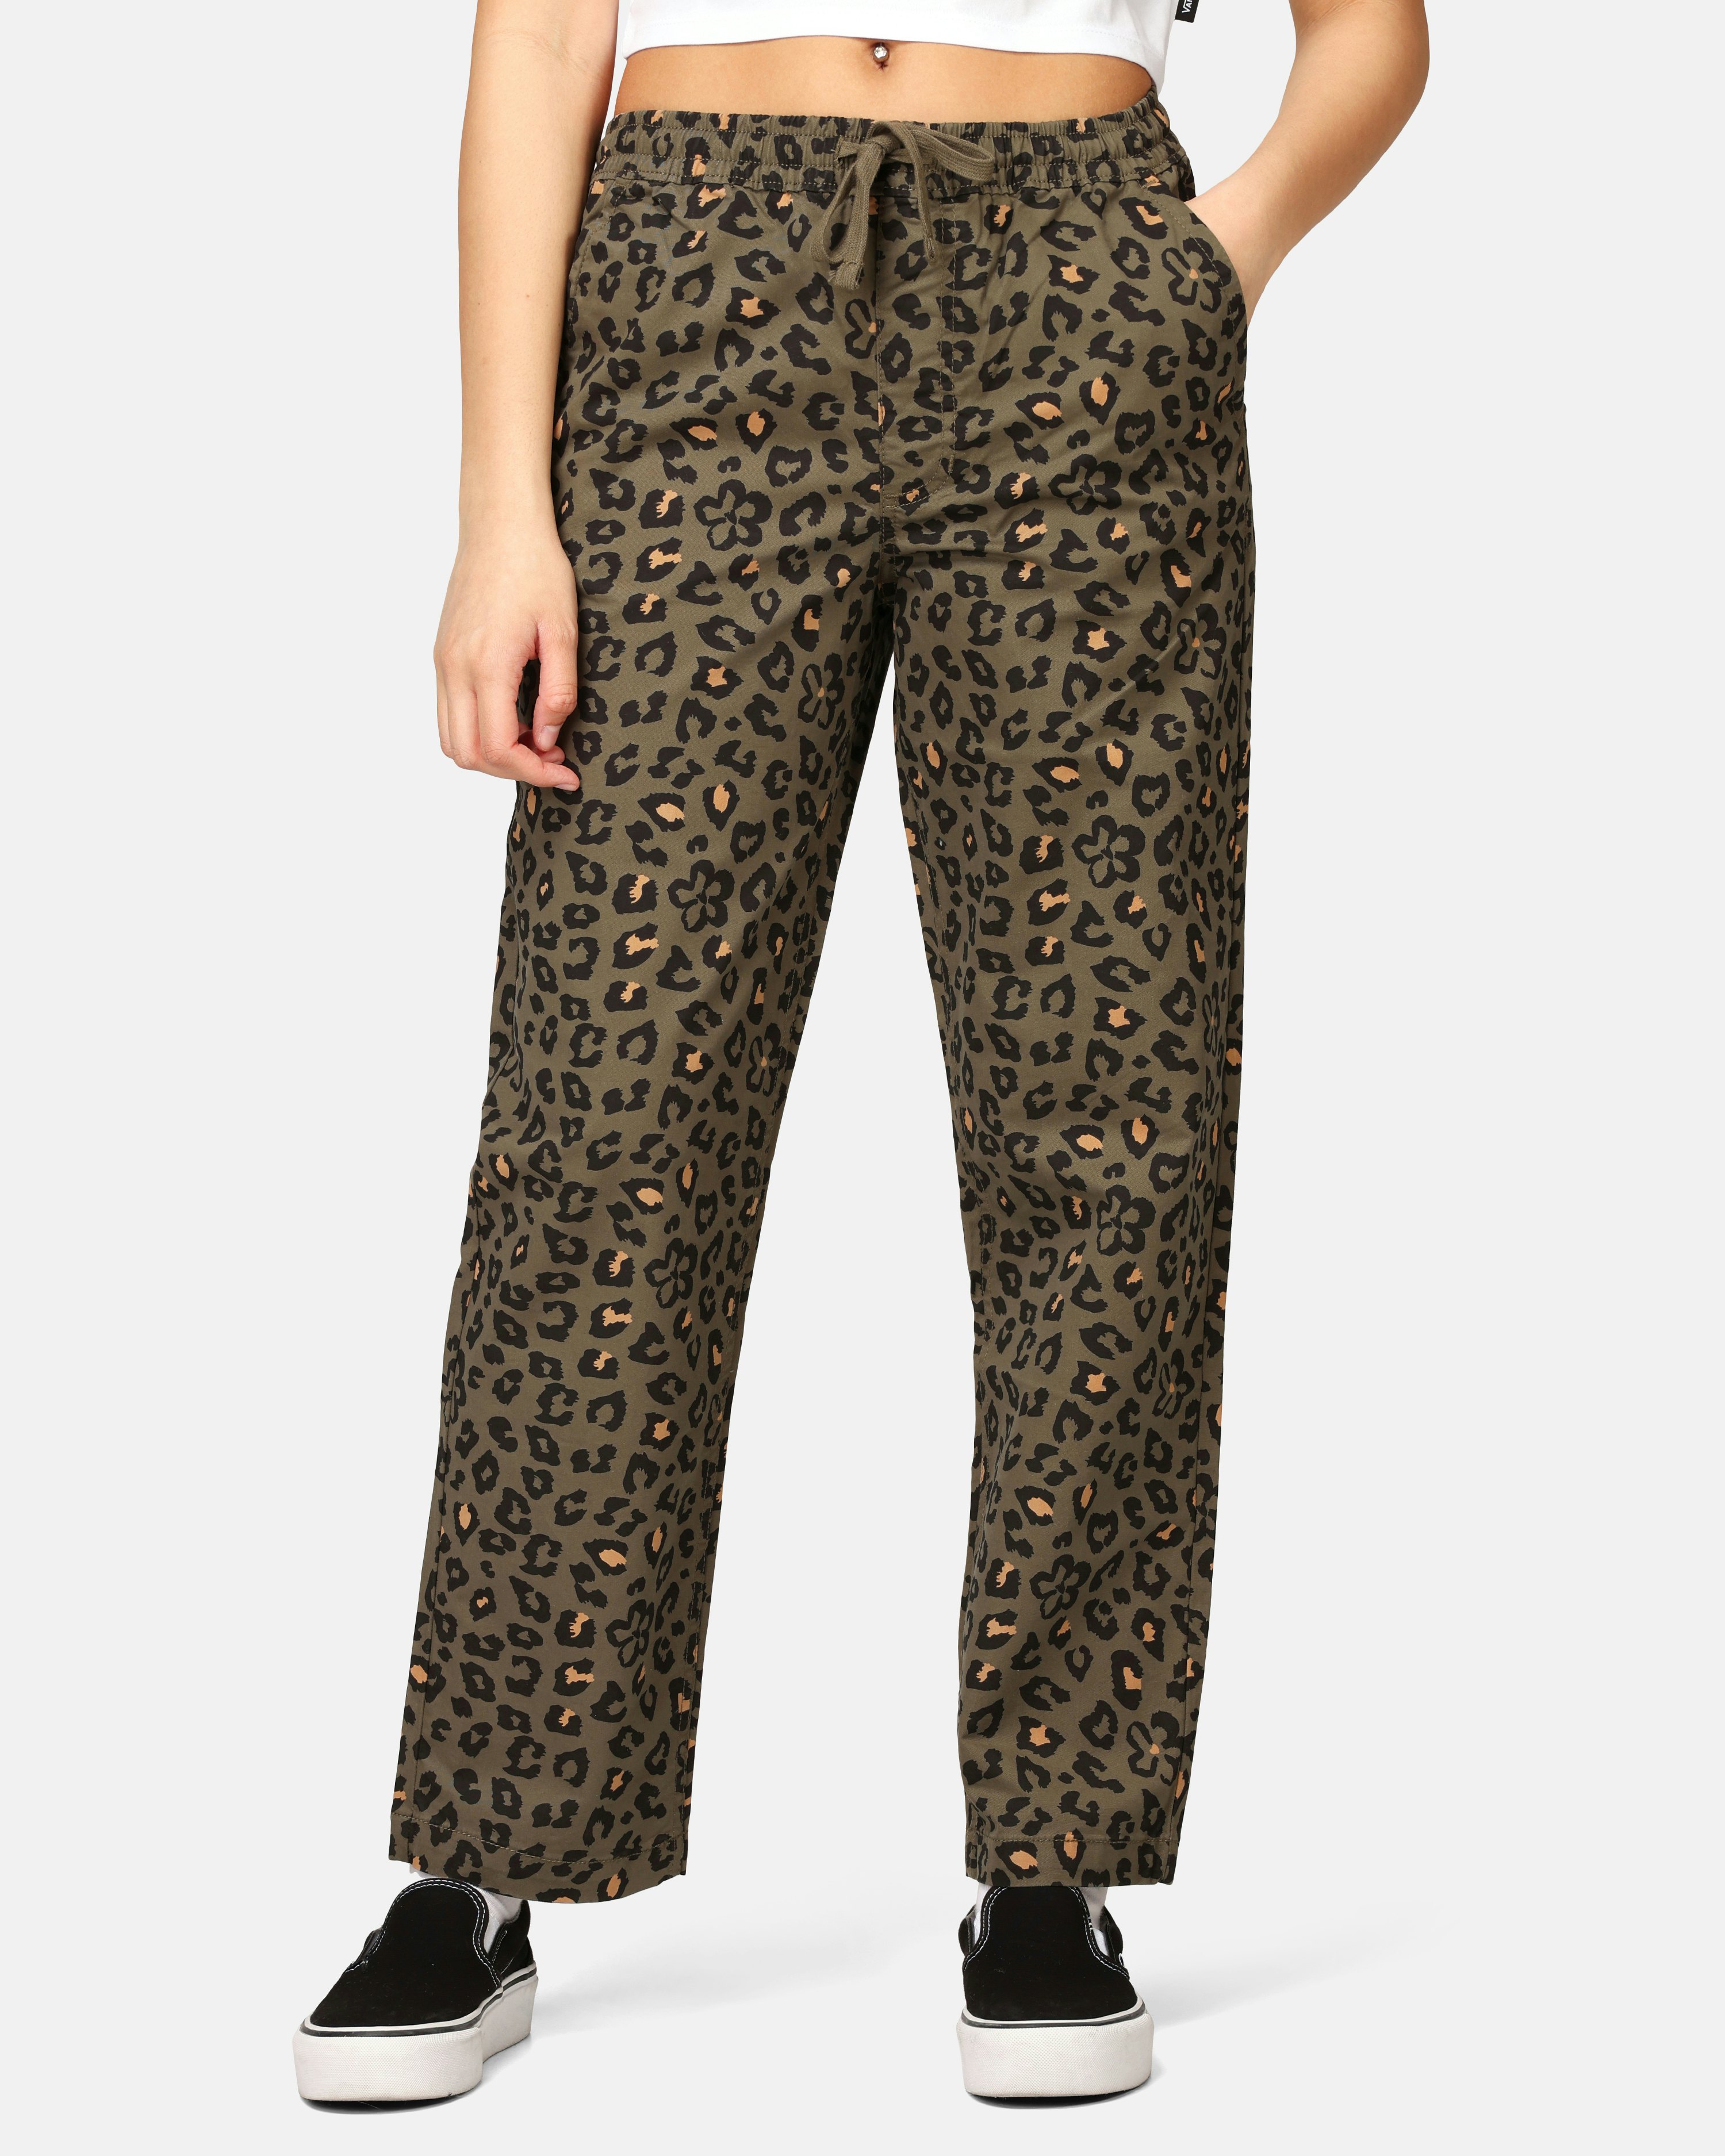 NWT WOMEN'S VANS RANGE PRINT RELAXED PANTS.SIZE SMALL.BRAND NEW FOR 2023.